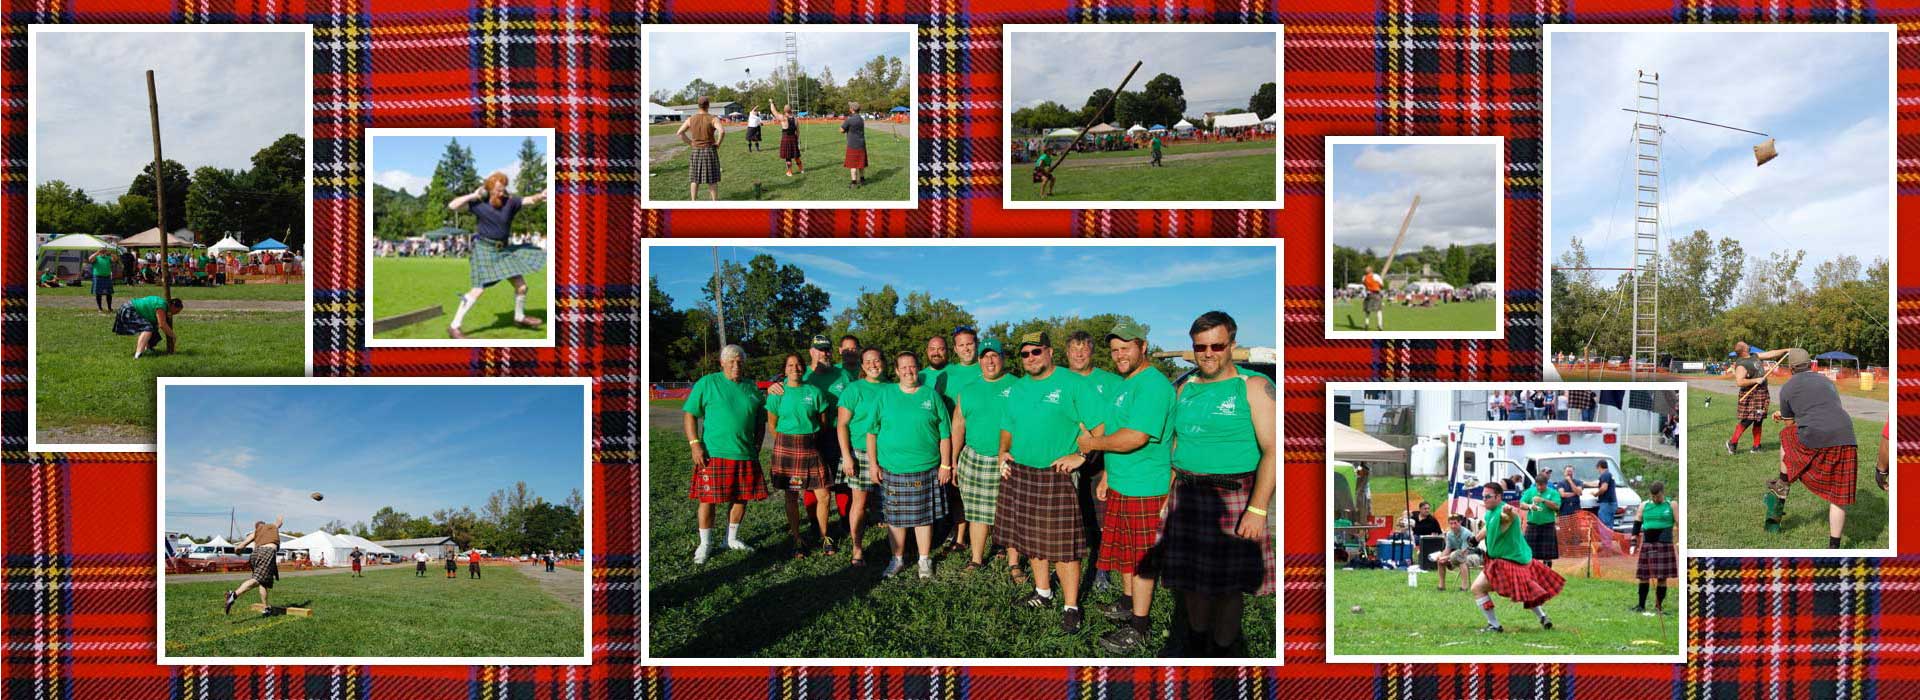 COME WATCH THE<br />HIGHLAND GAMES